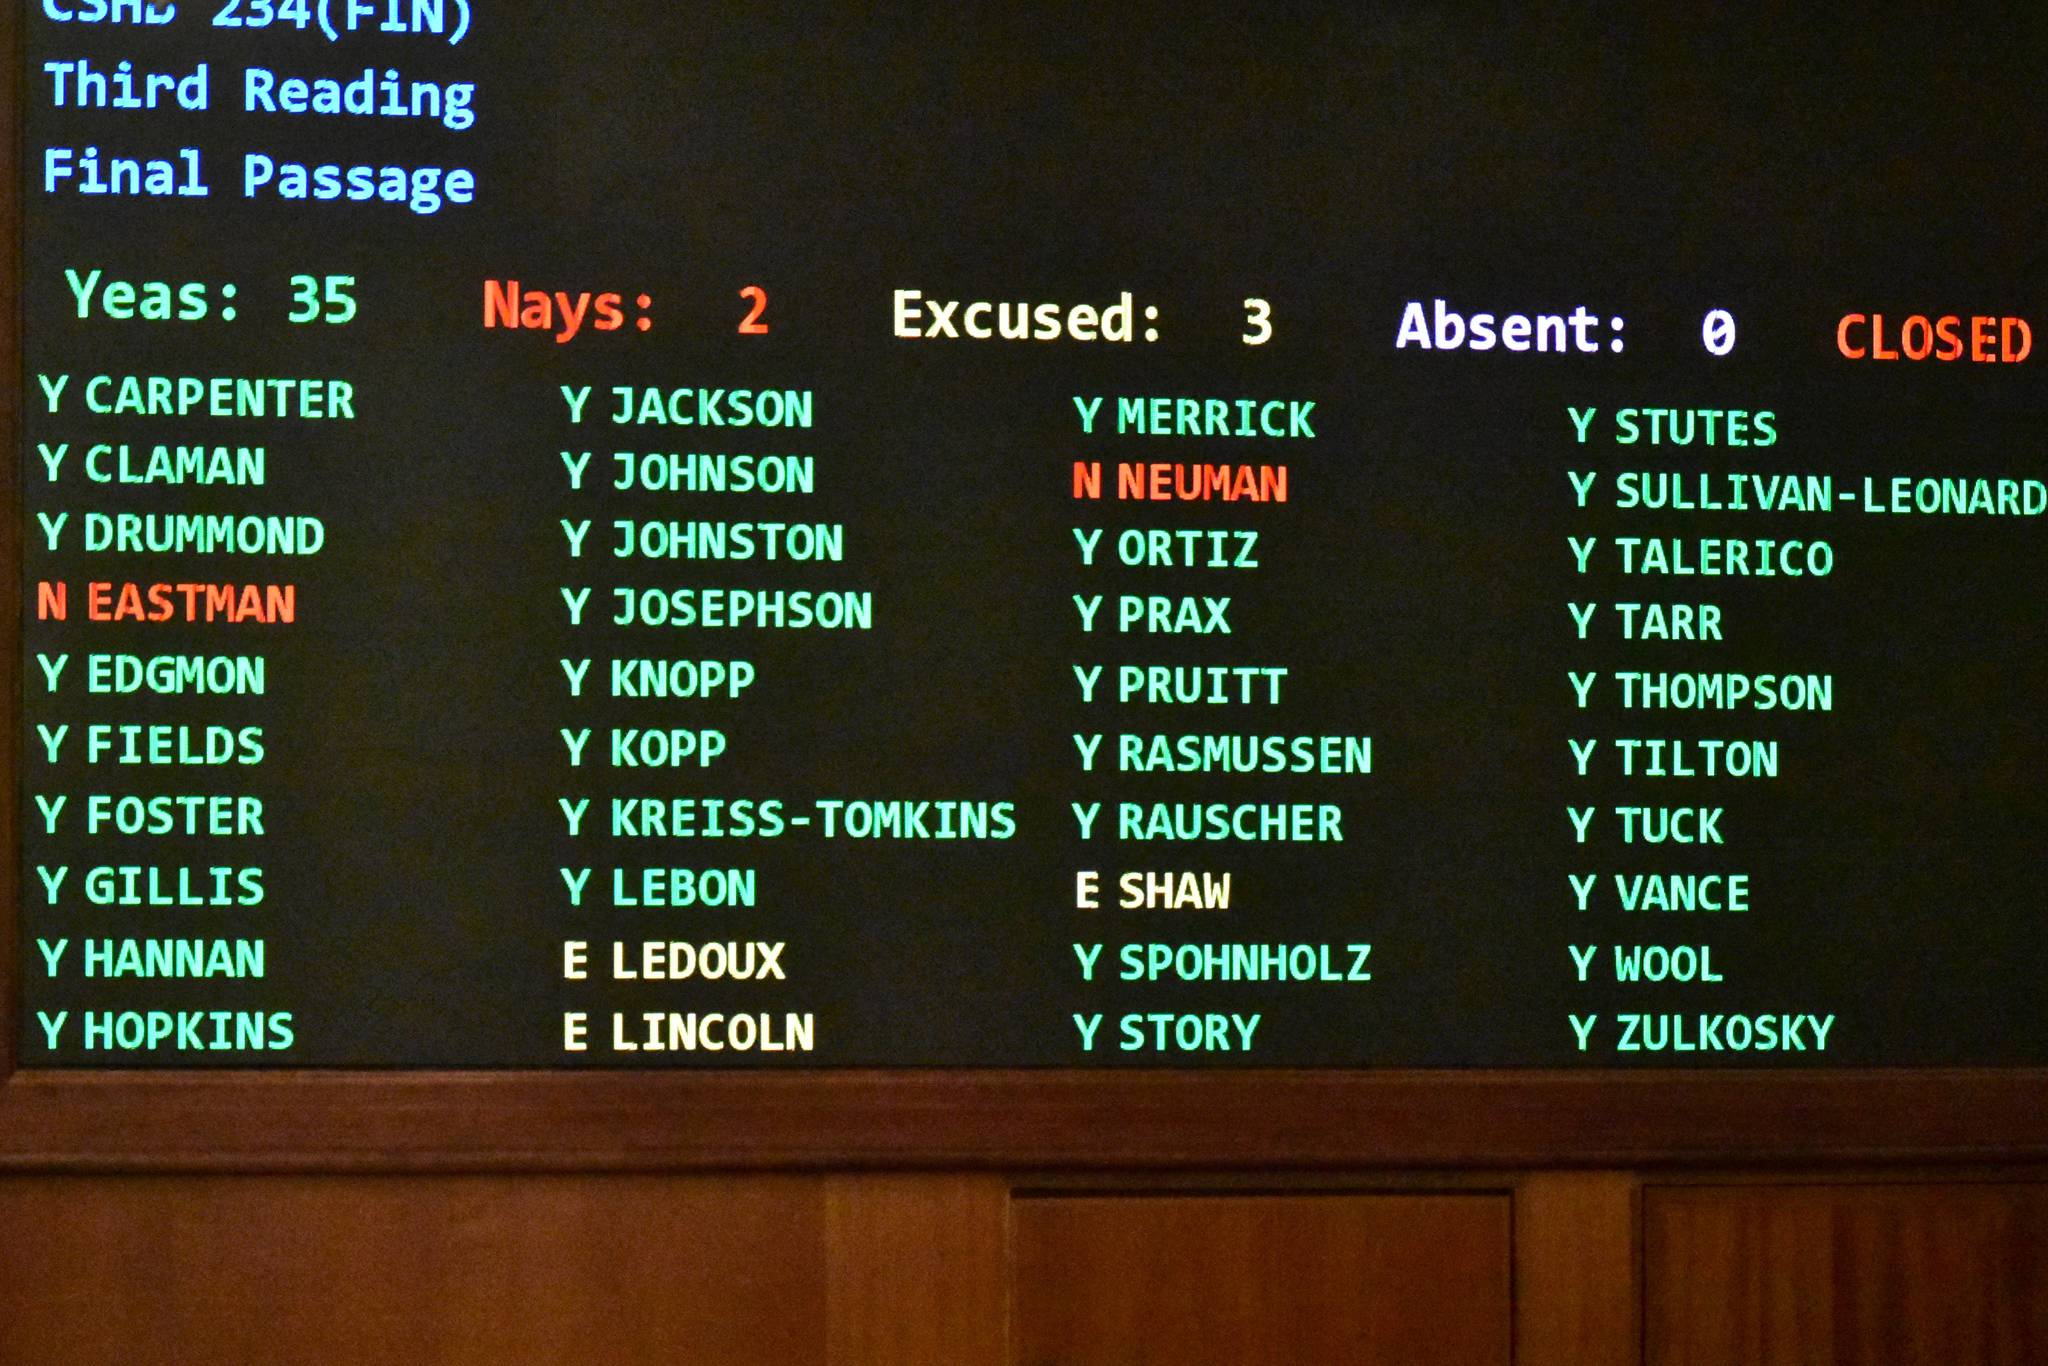 The voting board in the Alaska House of Representatives following the vote on the Fiscal Year 2020 budget on Wednesday, Feb. 26, 2020. (Peter Segall | Juneau Empire)